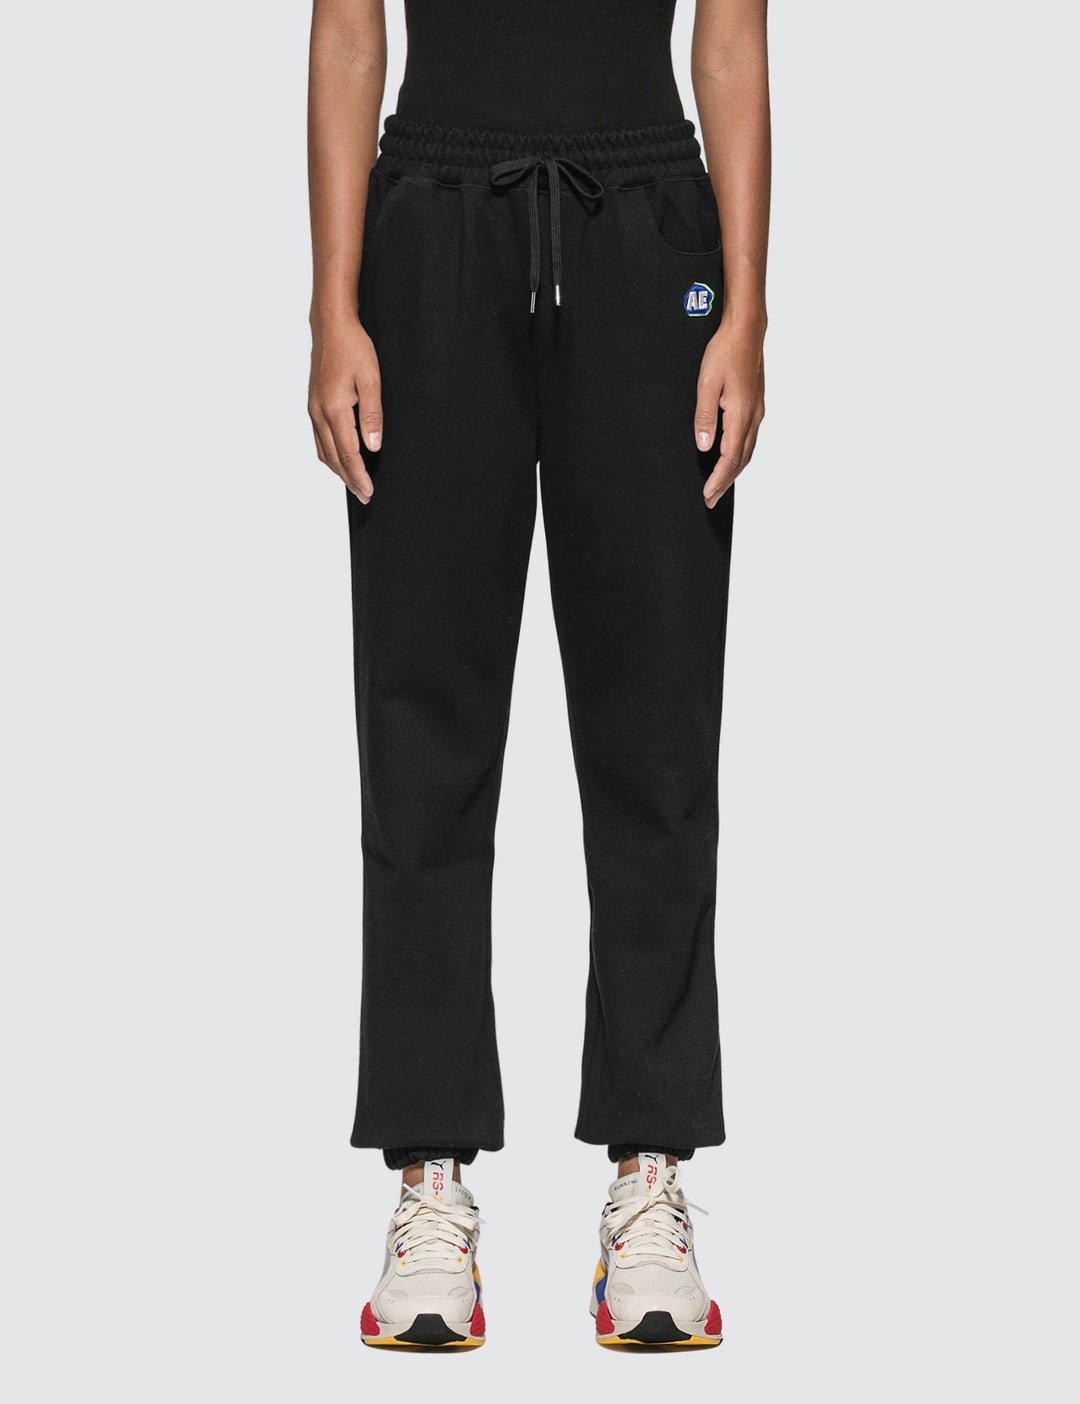 Ader Error - Embroidered Logo Sweatpants | HBX - Globally Curated ...